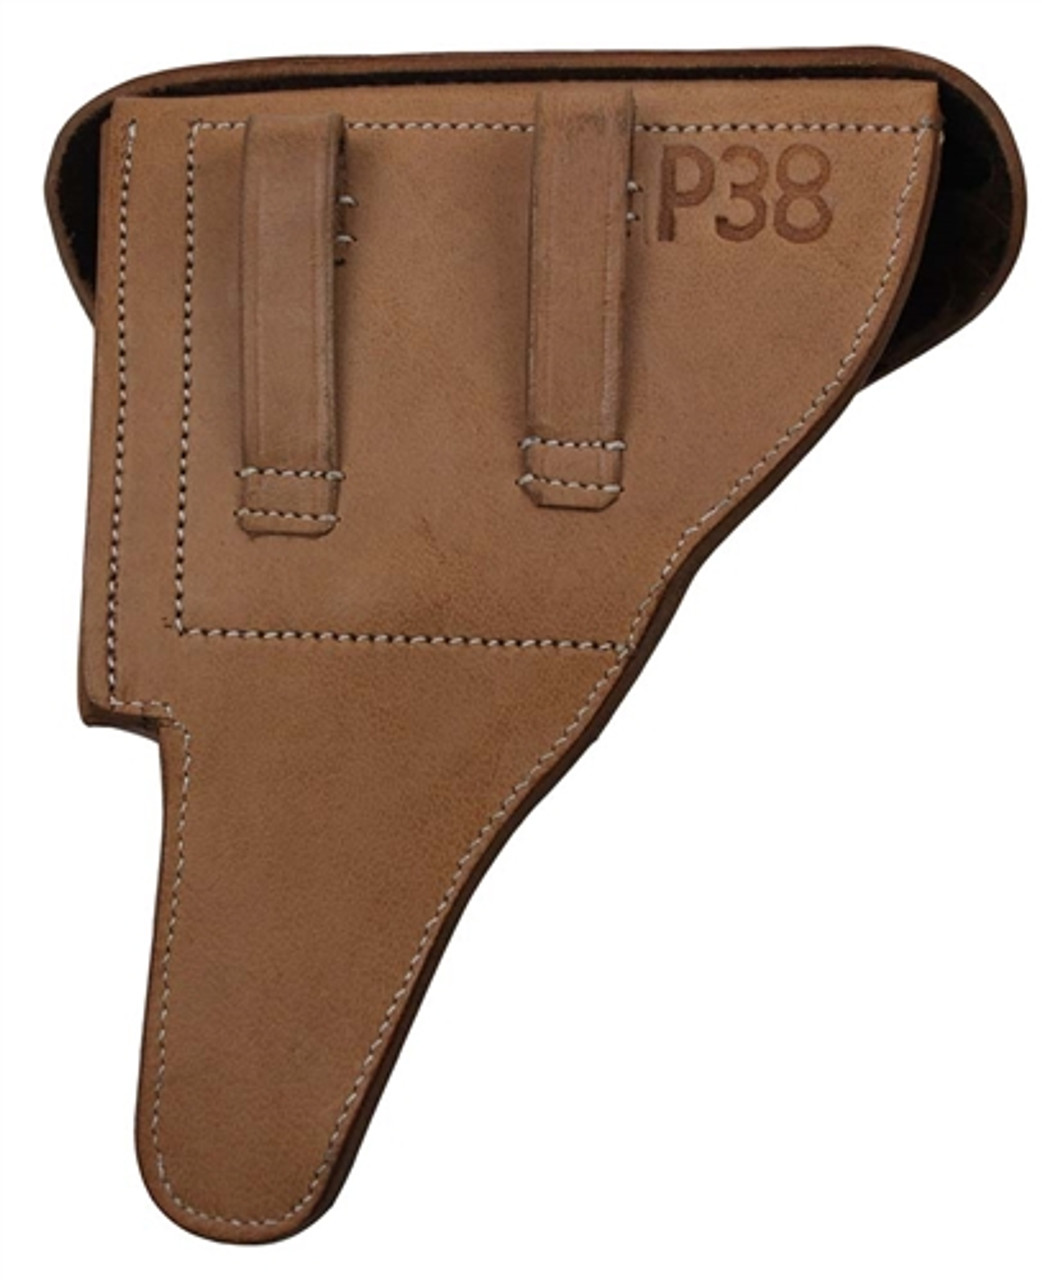 P-38 Hardshell Holster - Natural Leather from Hessen Antique